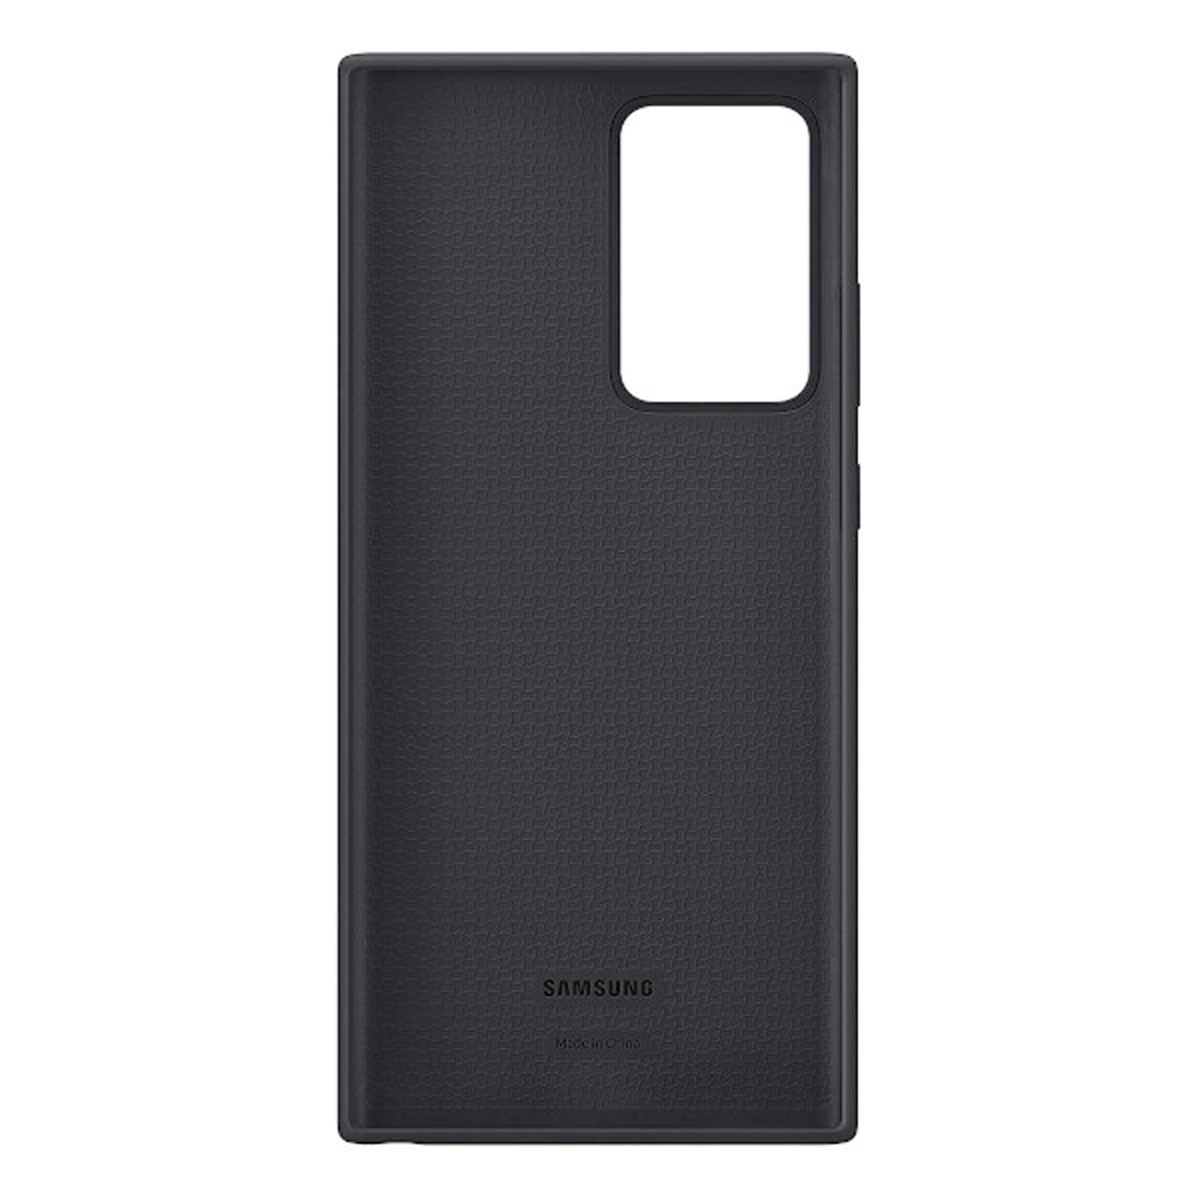 Note Schwarz Touch Soft Samsung, Backcover, 20, SAMSUNG Series, Cover Galaxy